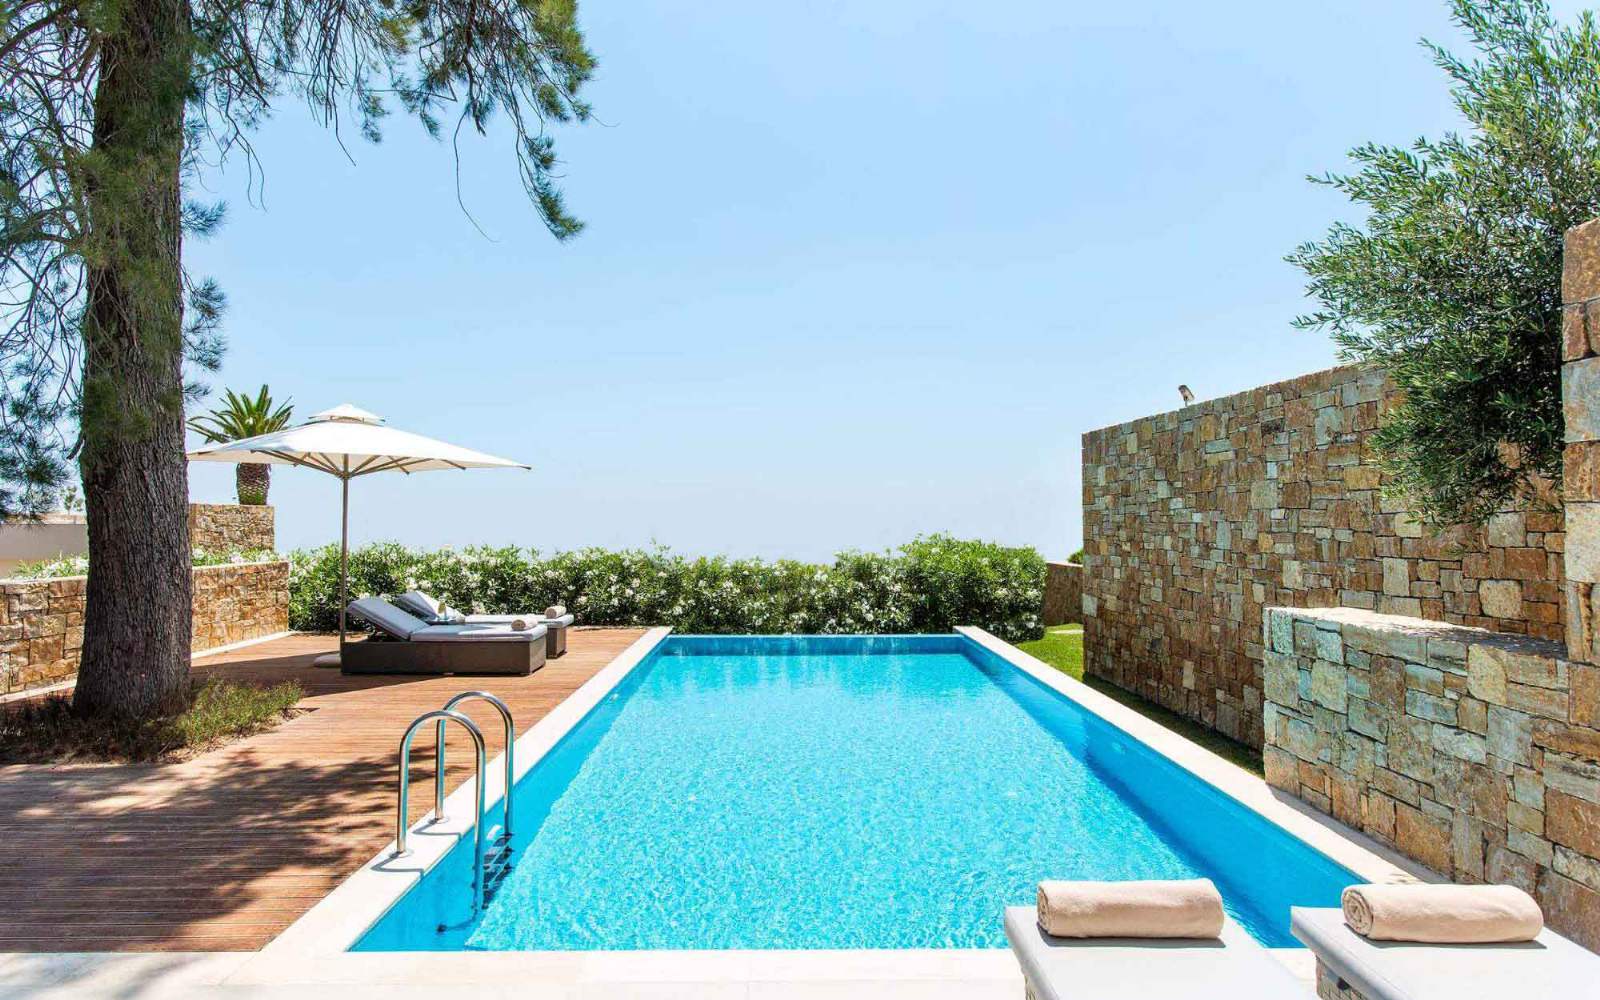 Ikos Olivia - Deluxe one bedroom bungalow with private pool